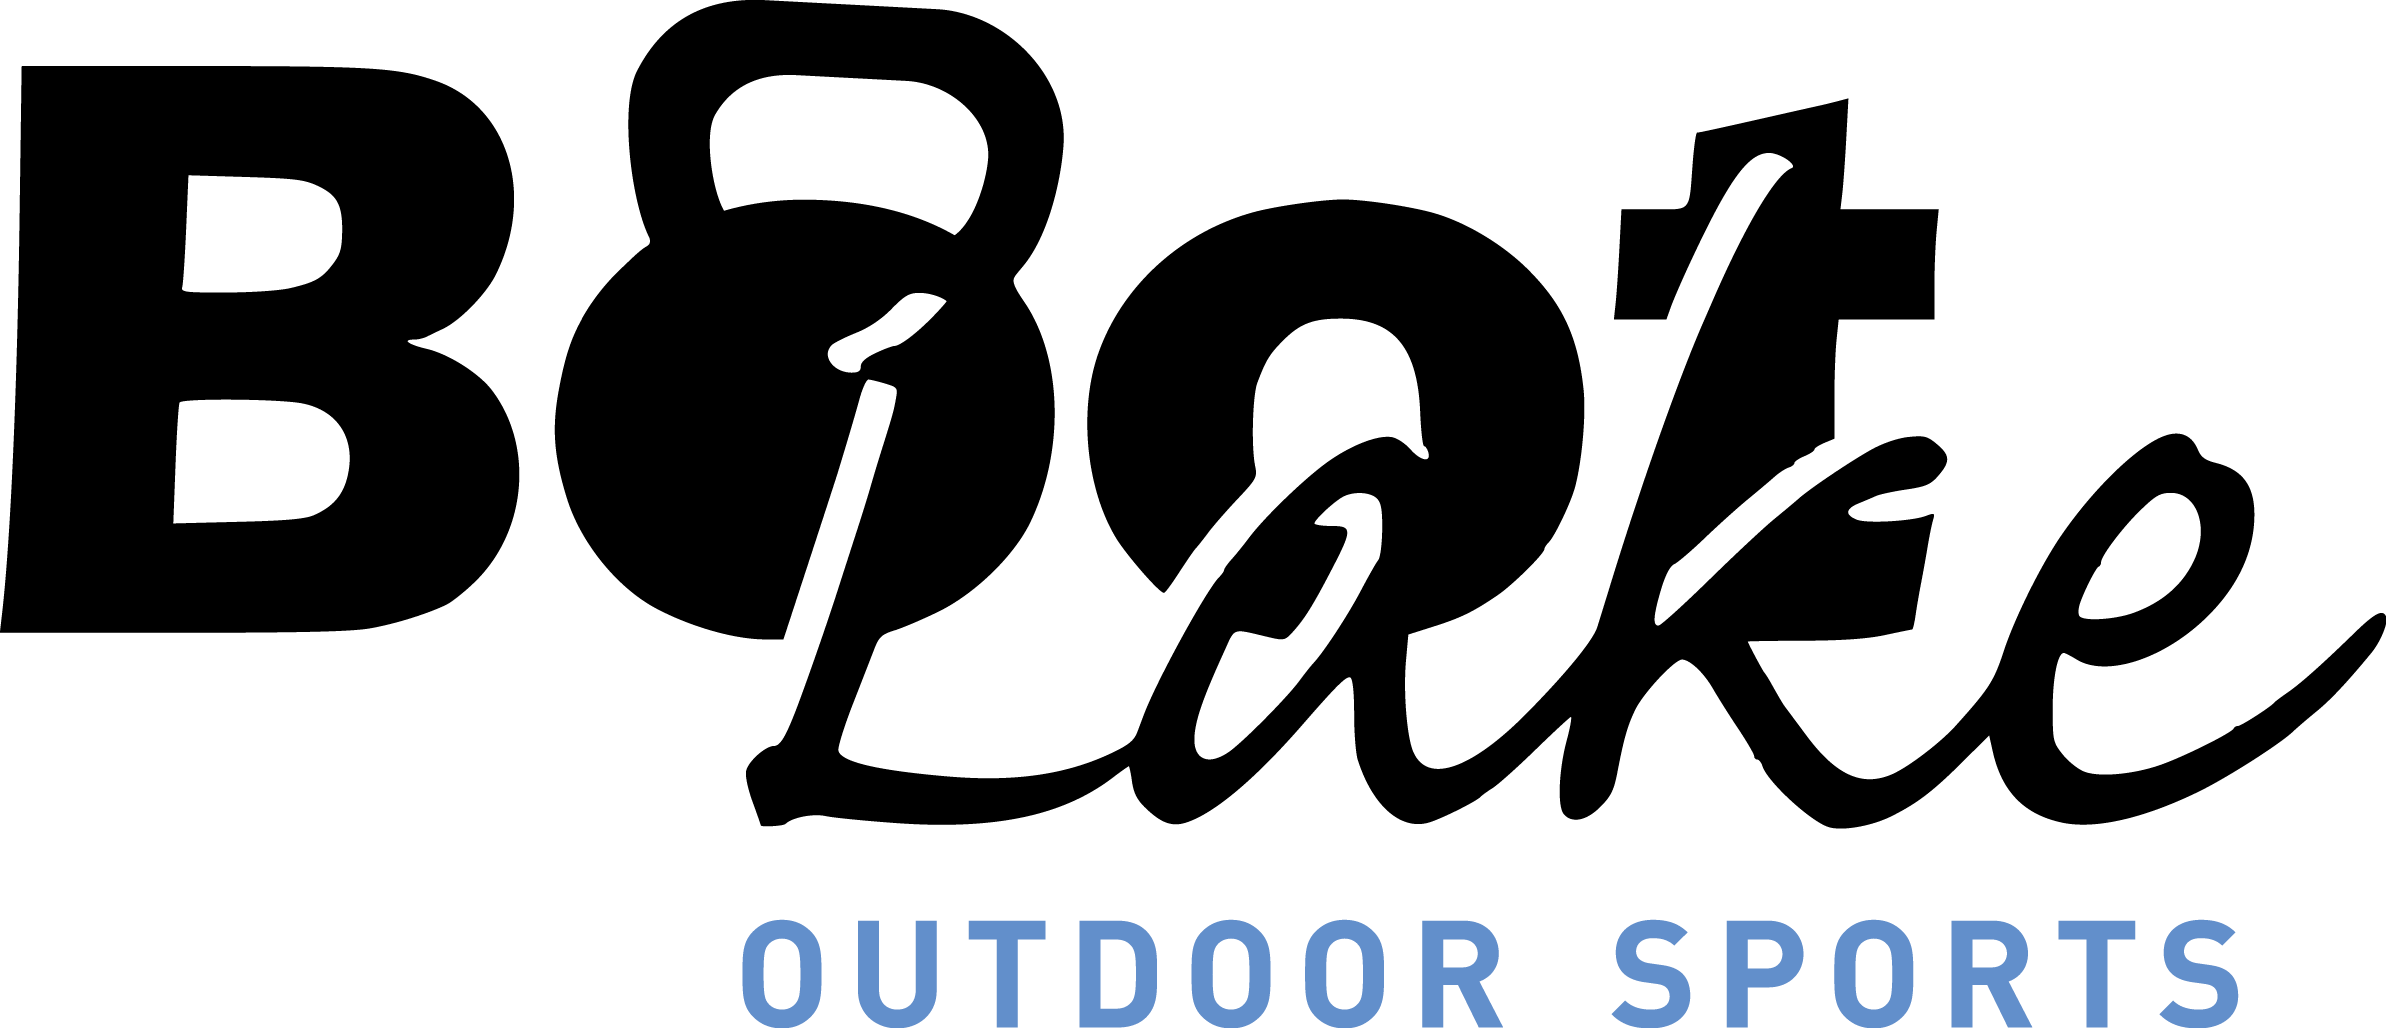 Bootlake – Outdoor Sports